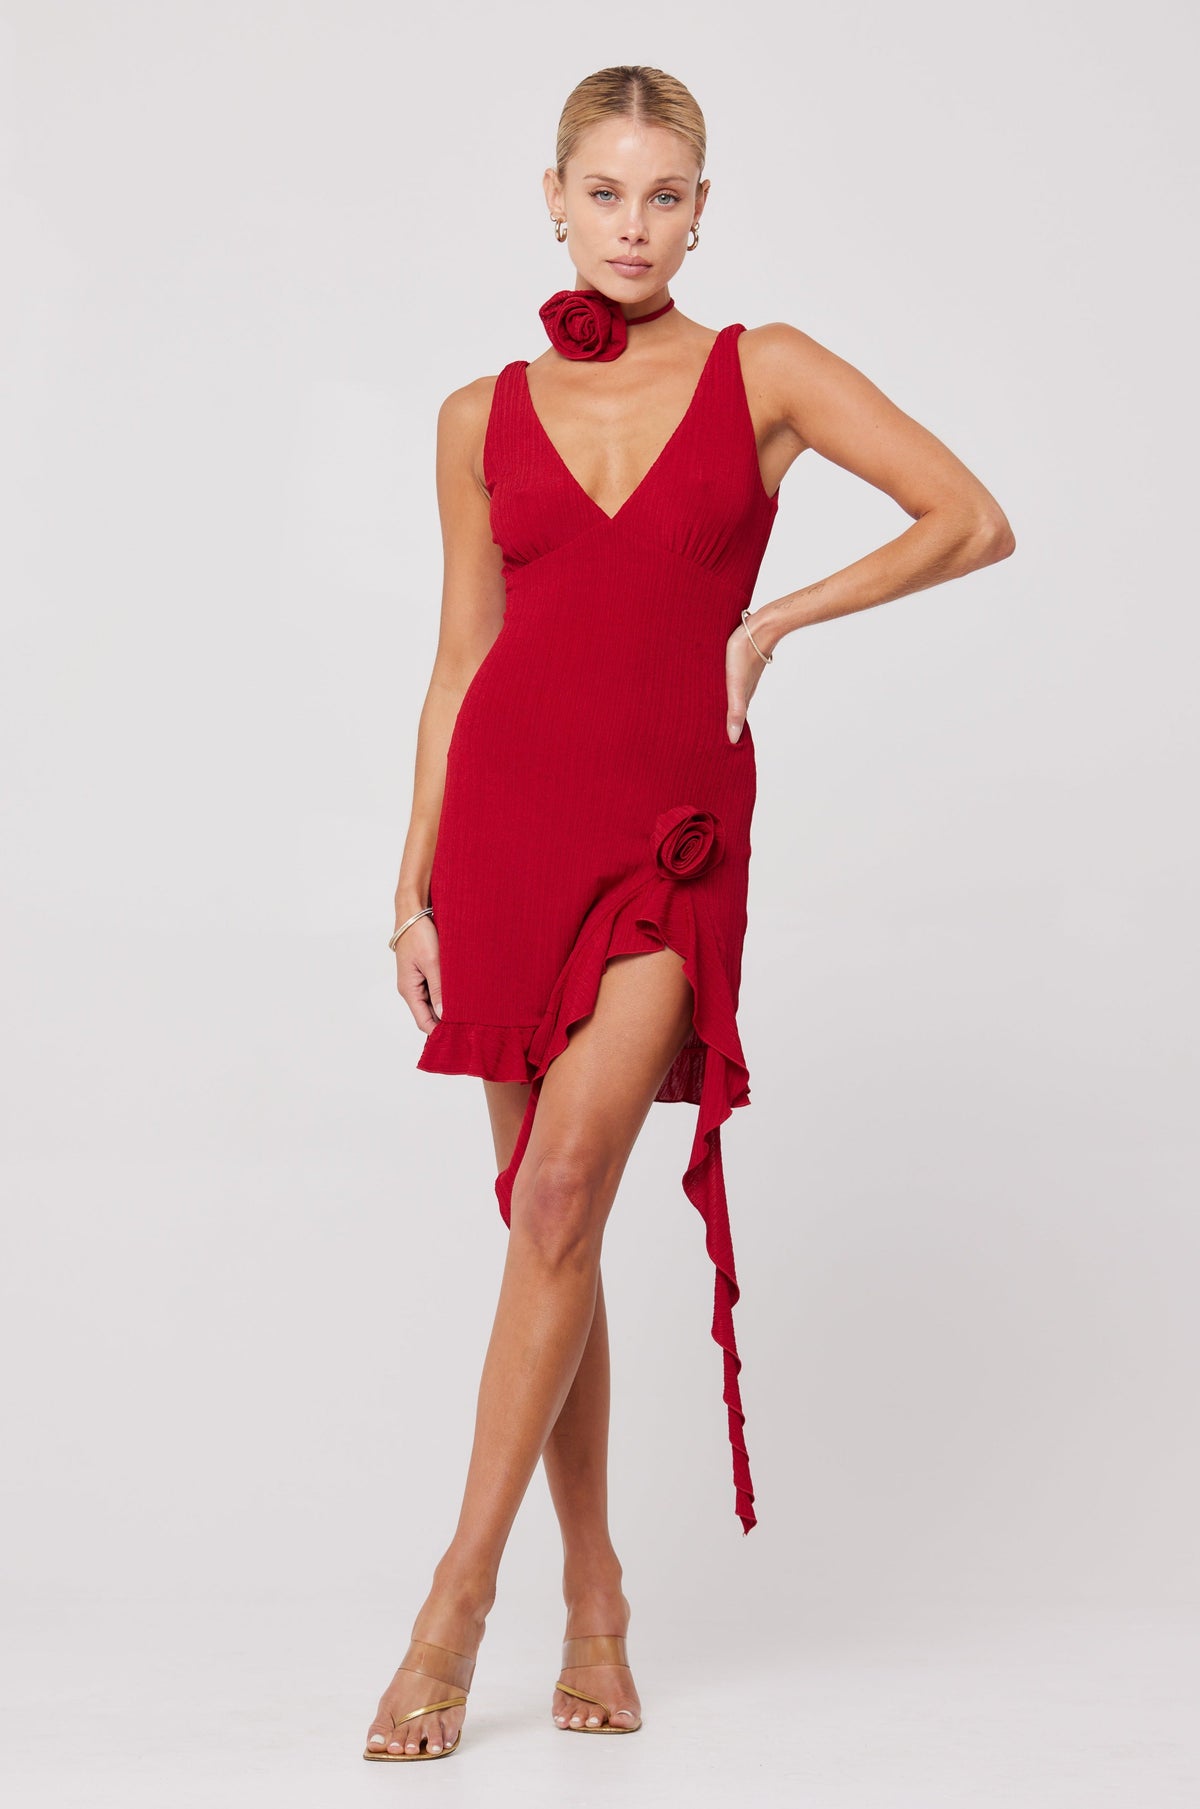 This is an image of Anyssa Mini in Ruby - RESA featuring a model wearing the dress